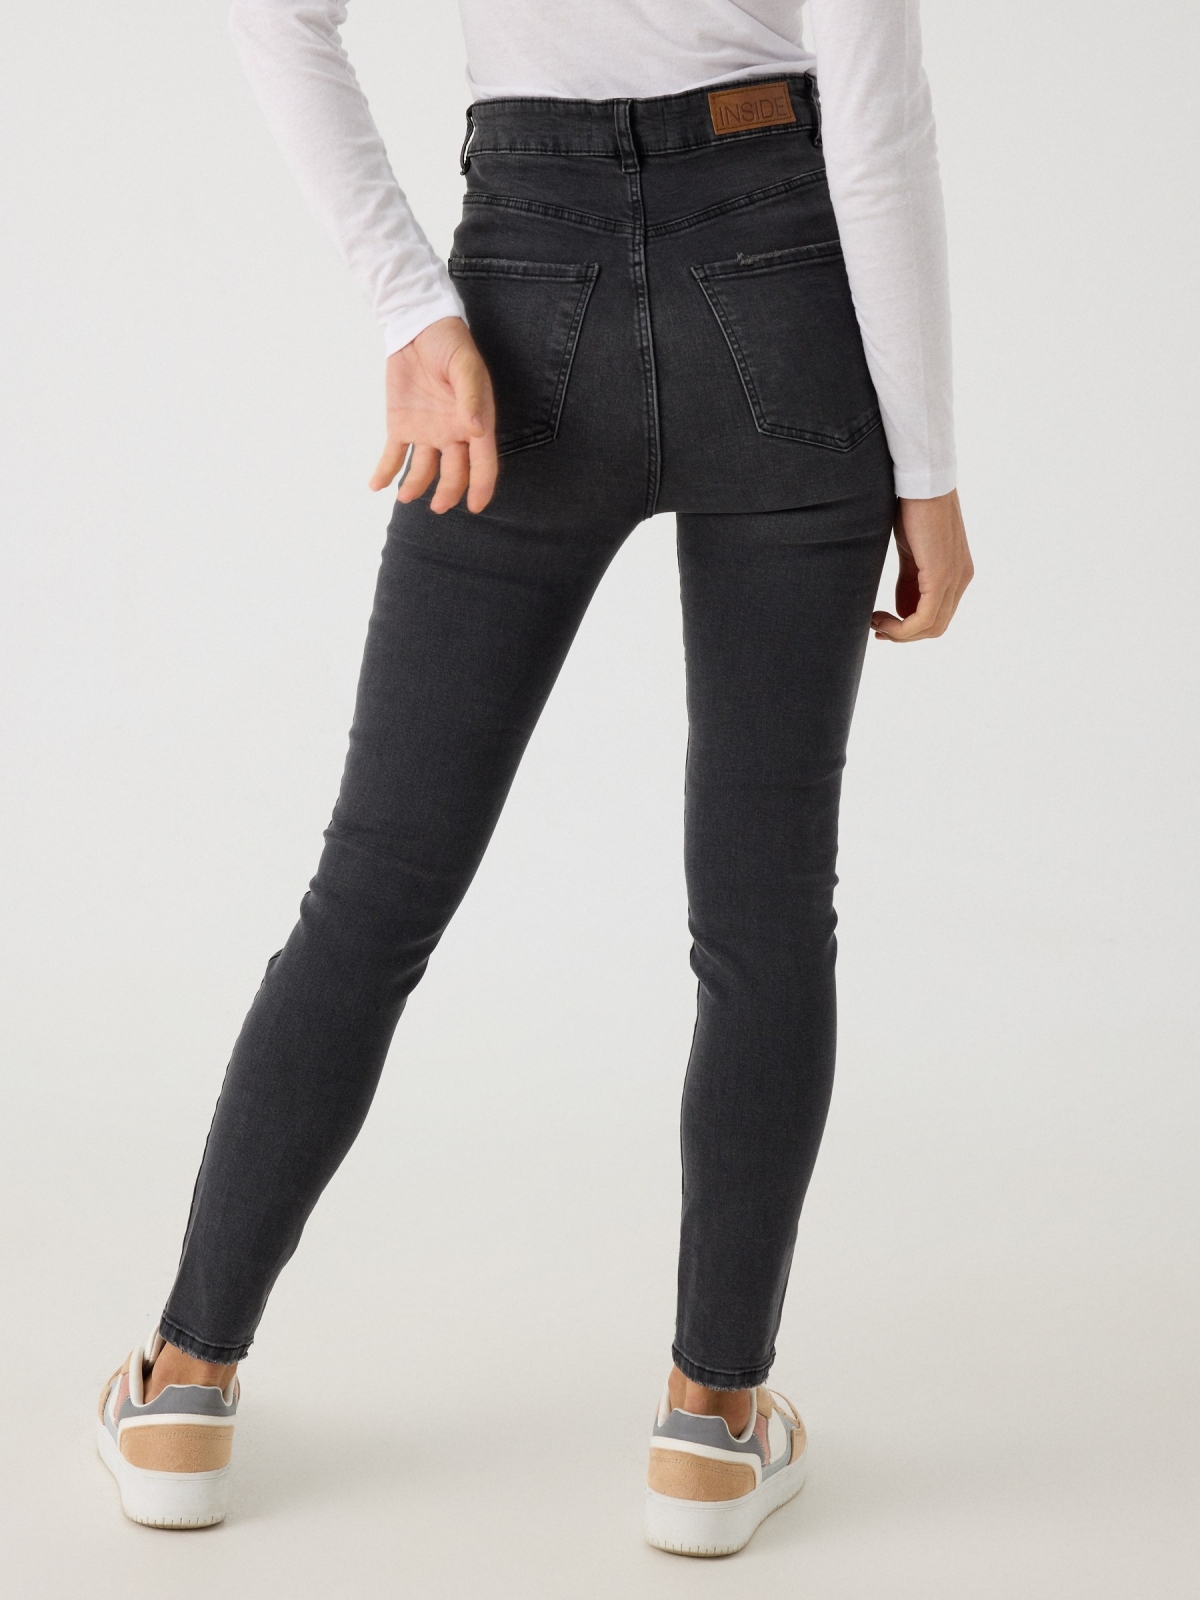 High waist skinny jeans black washed effect black middle back view